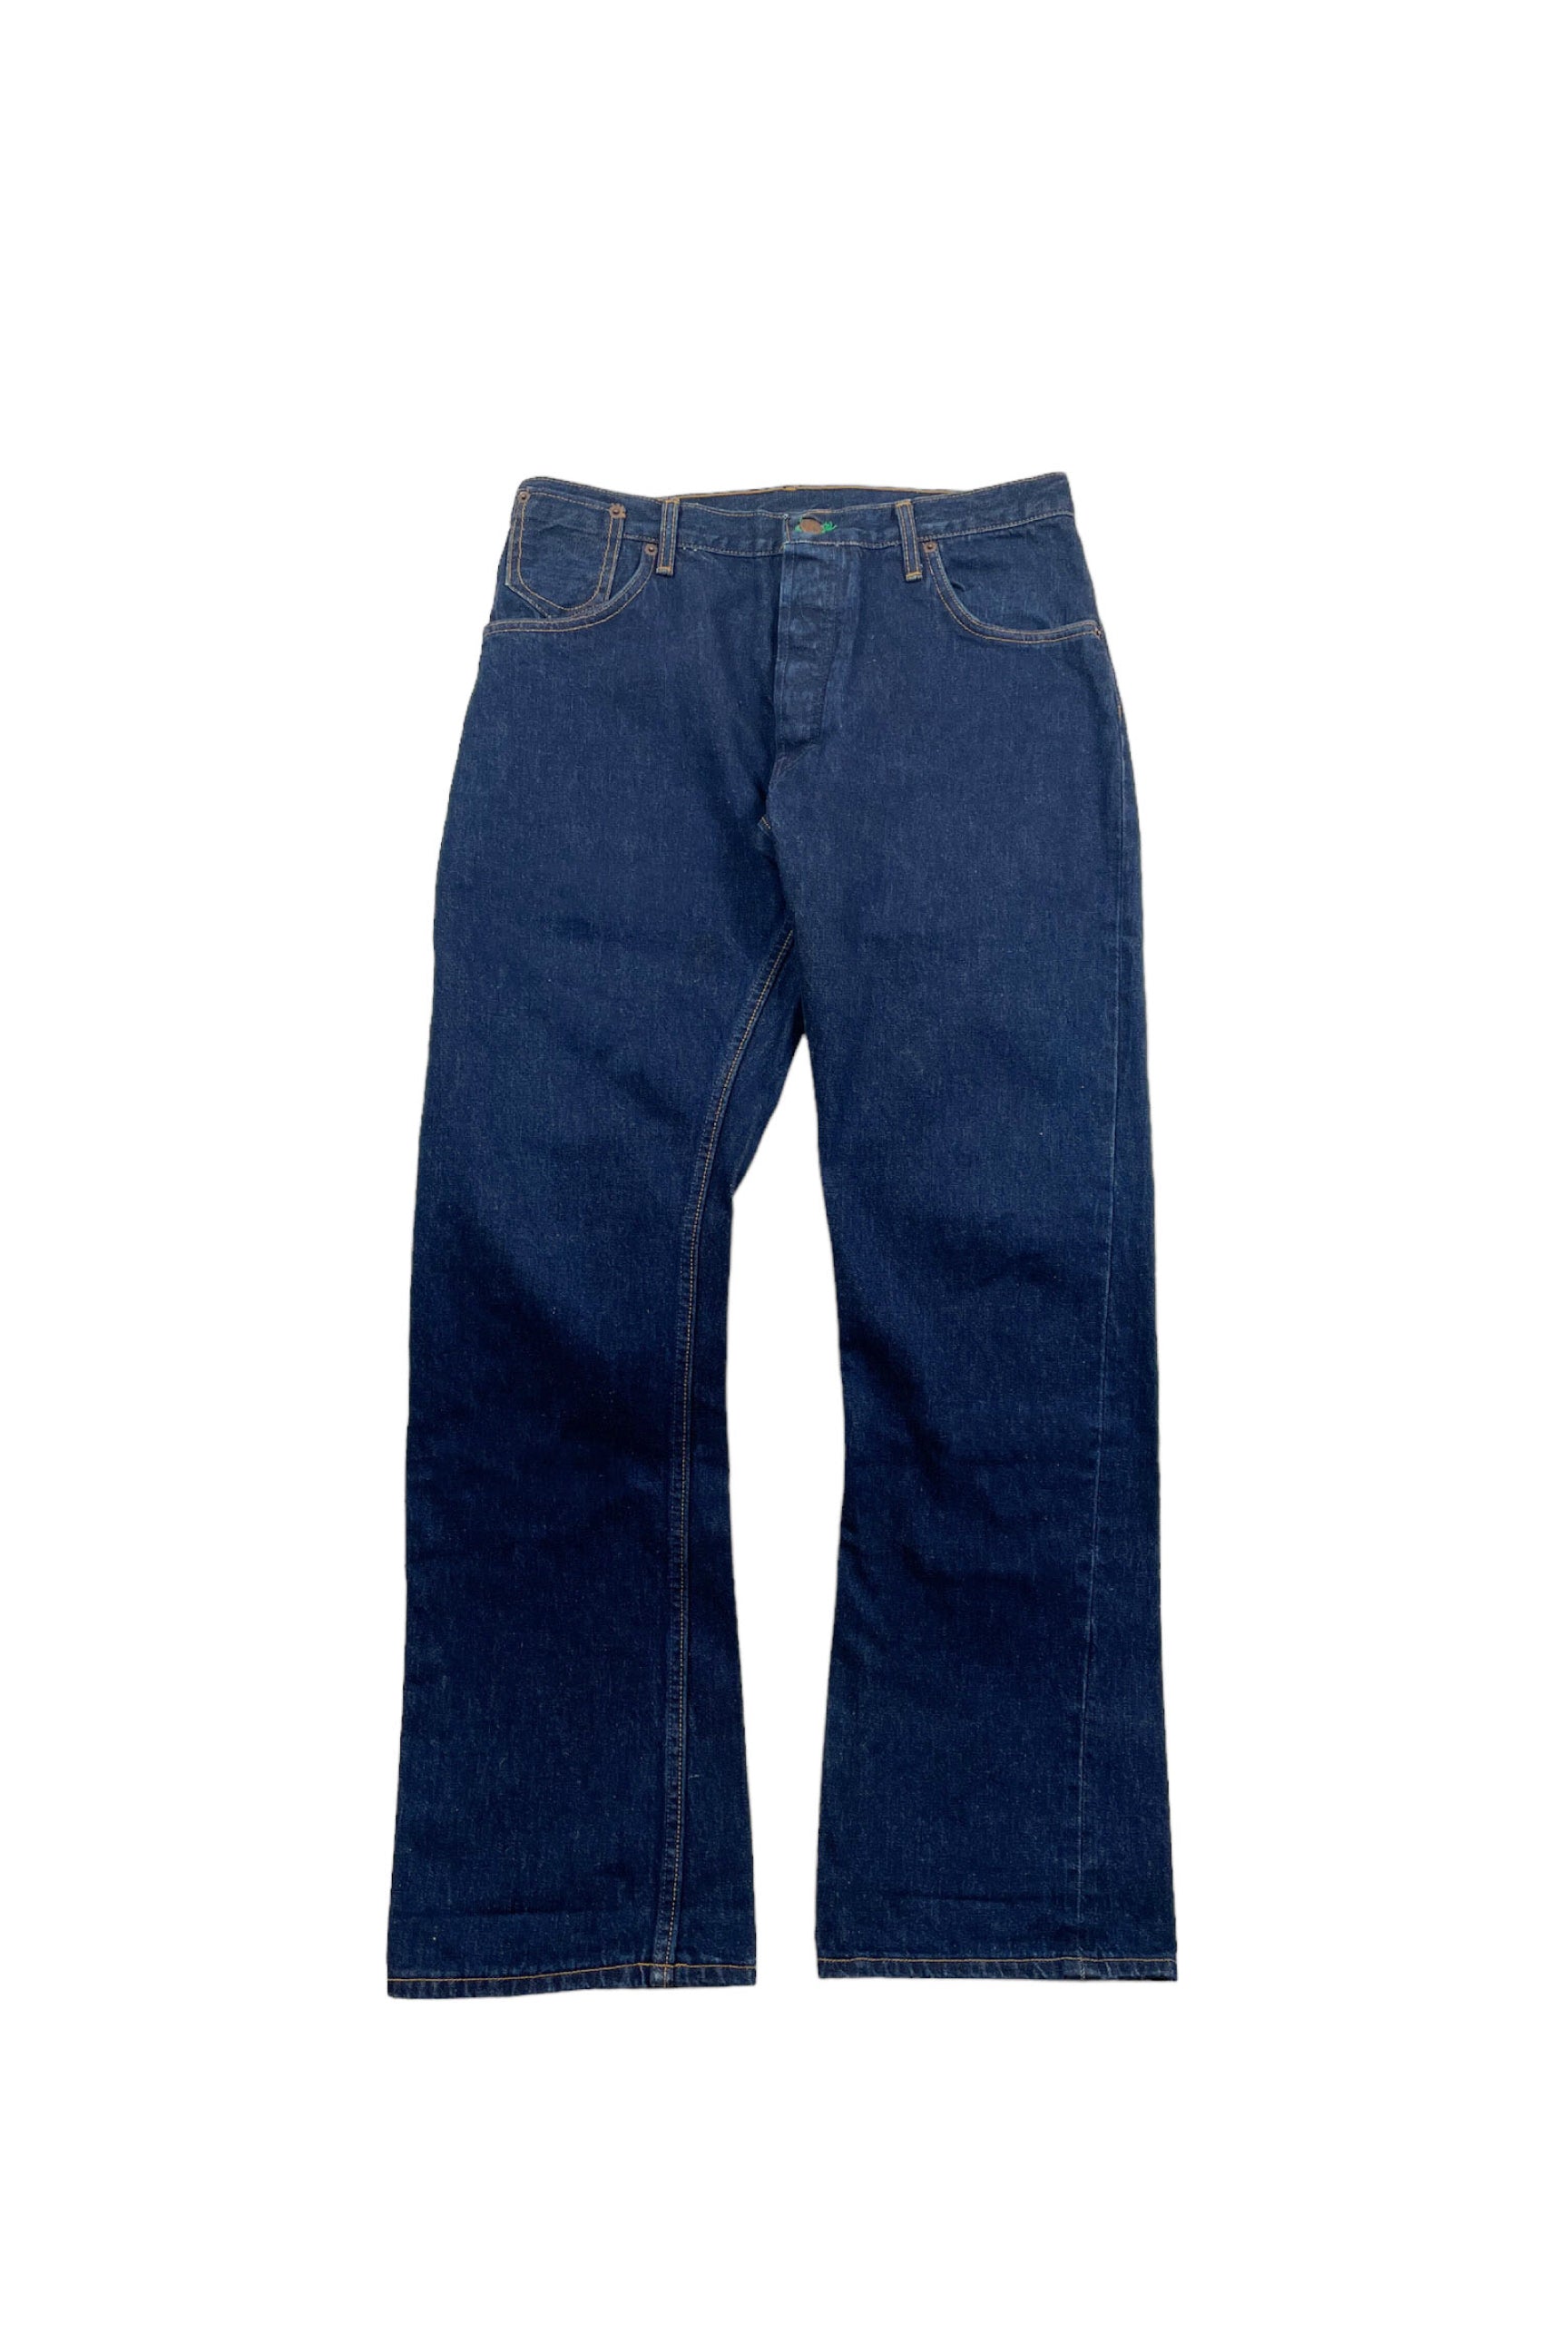 90's Made in USA LEFT FIELD denim pants – ReSCOUNT STORE